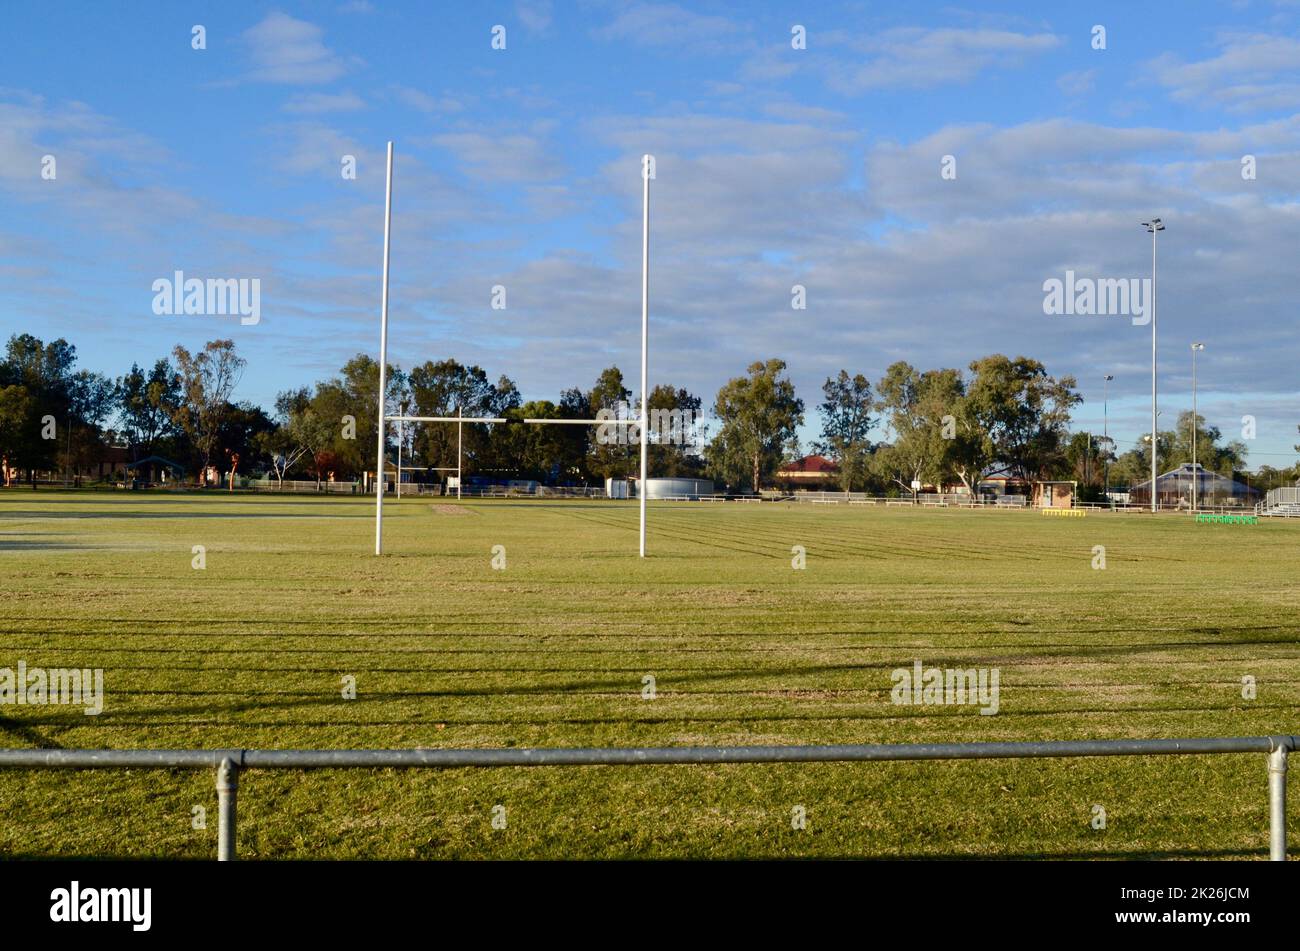 A rugby field in a park in the rural town of Trundle, Australia Stock Photo